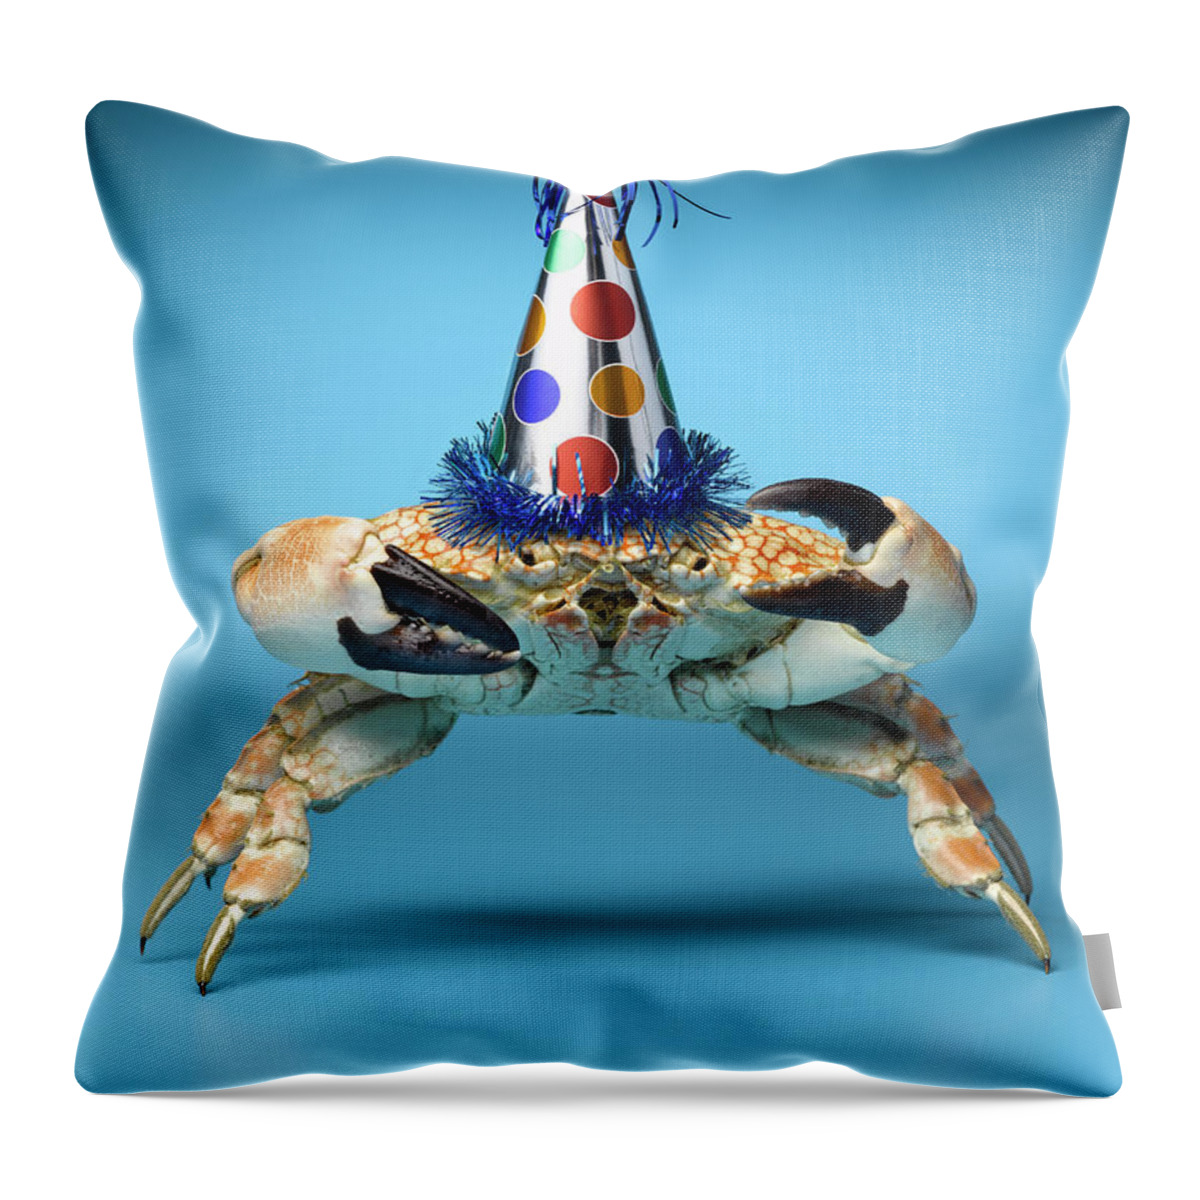 Animal Themes Throw Pillow featuring the photograph Crab Wearing Birthday Party Hat by Jeffrey Hamilton